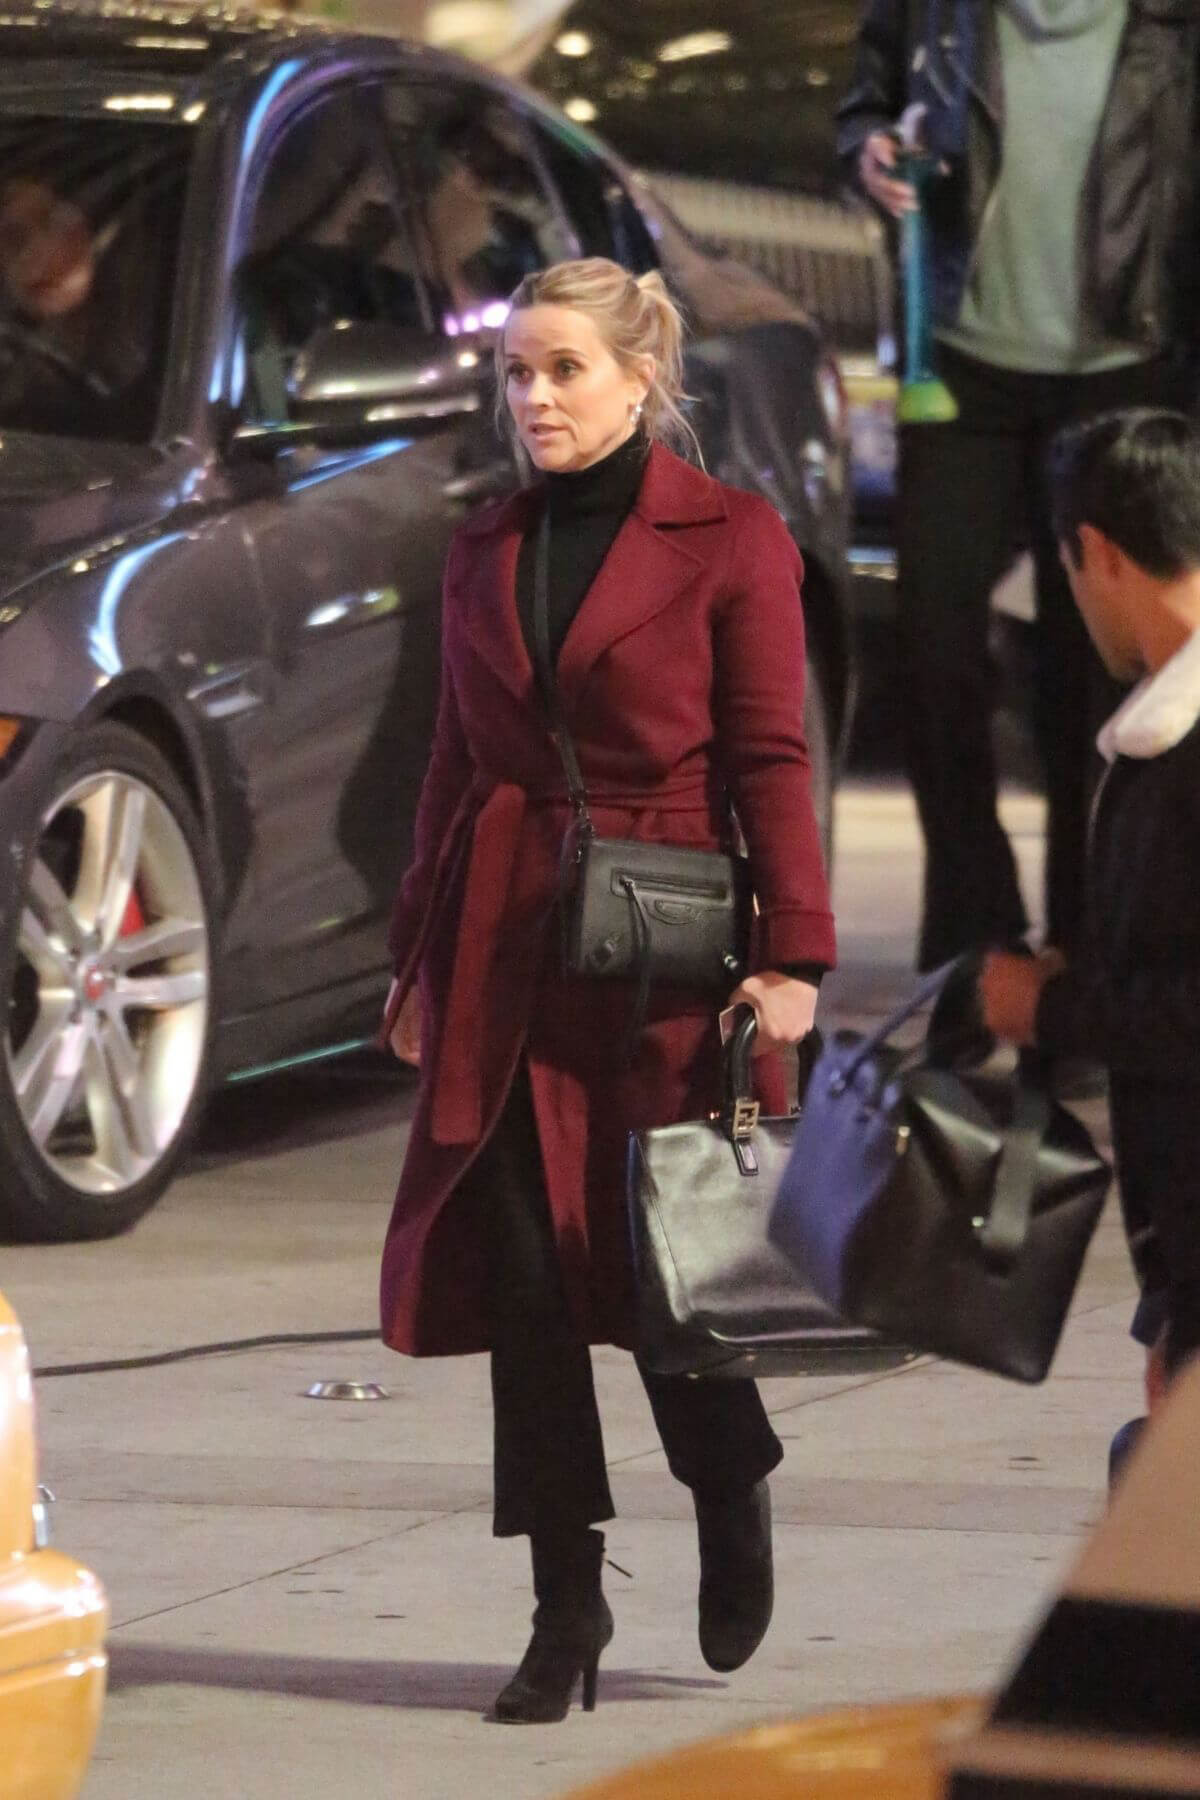 Reese Witherspoon Wraps Up Warm as She Spotted on the Set of 